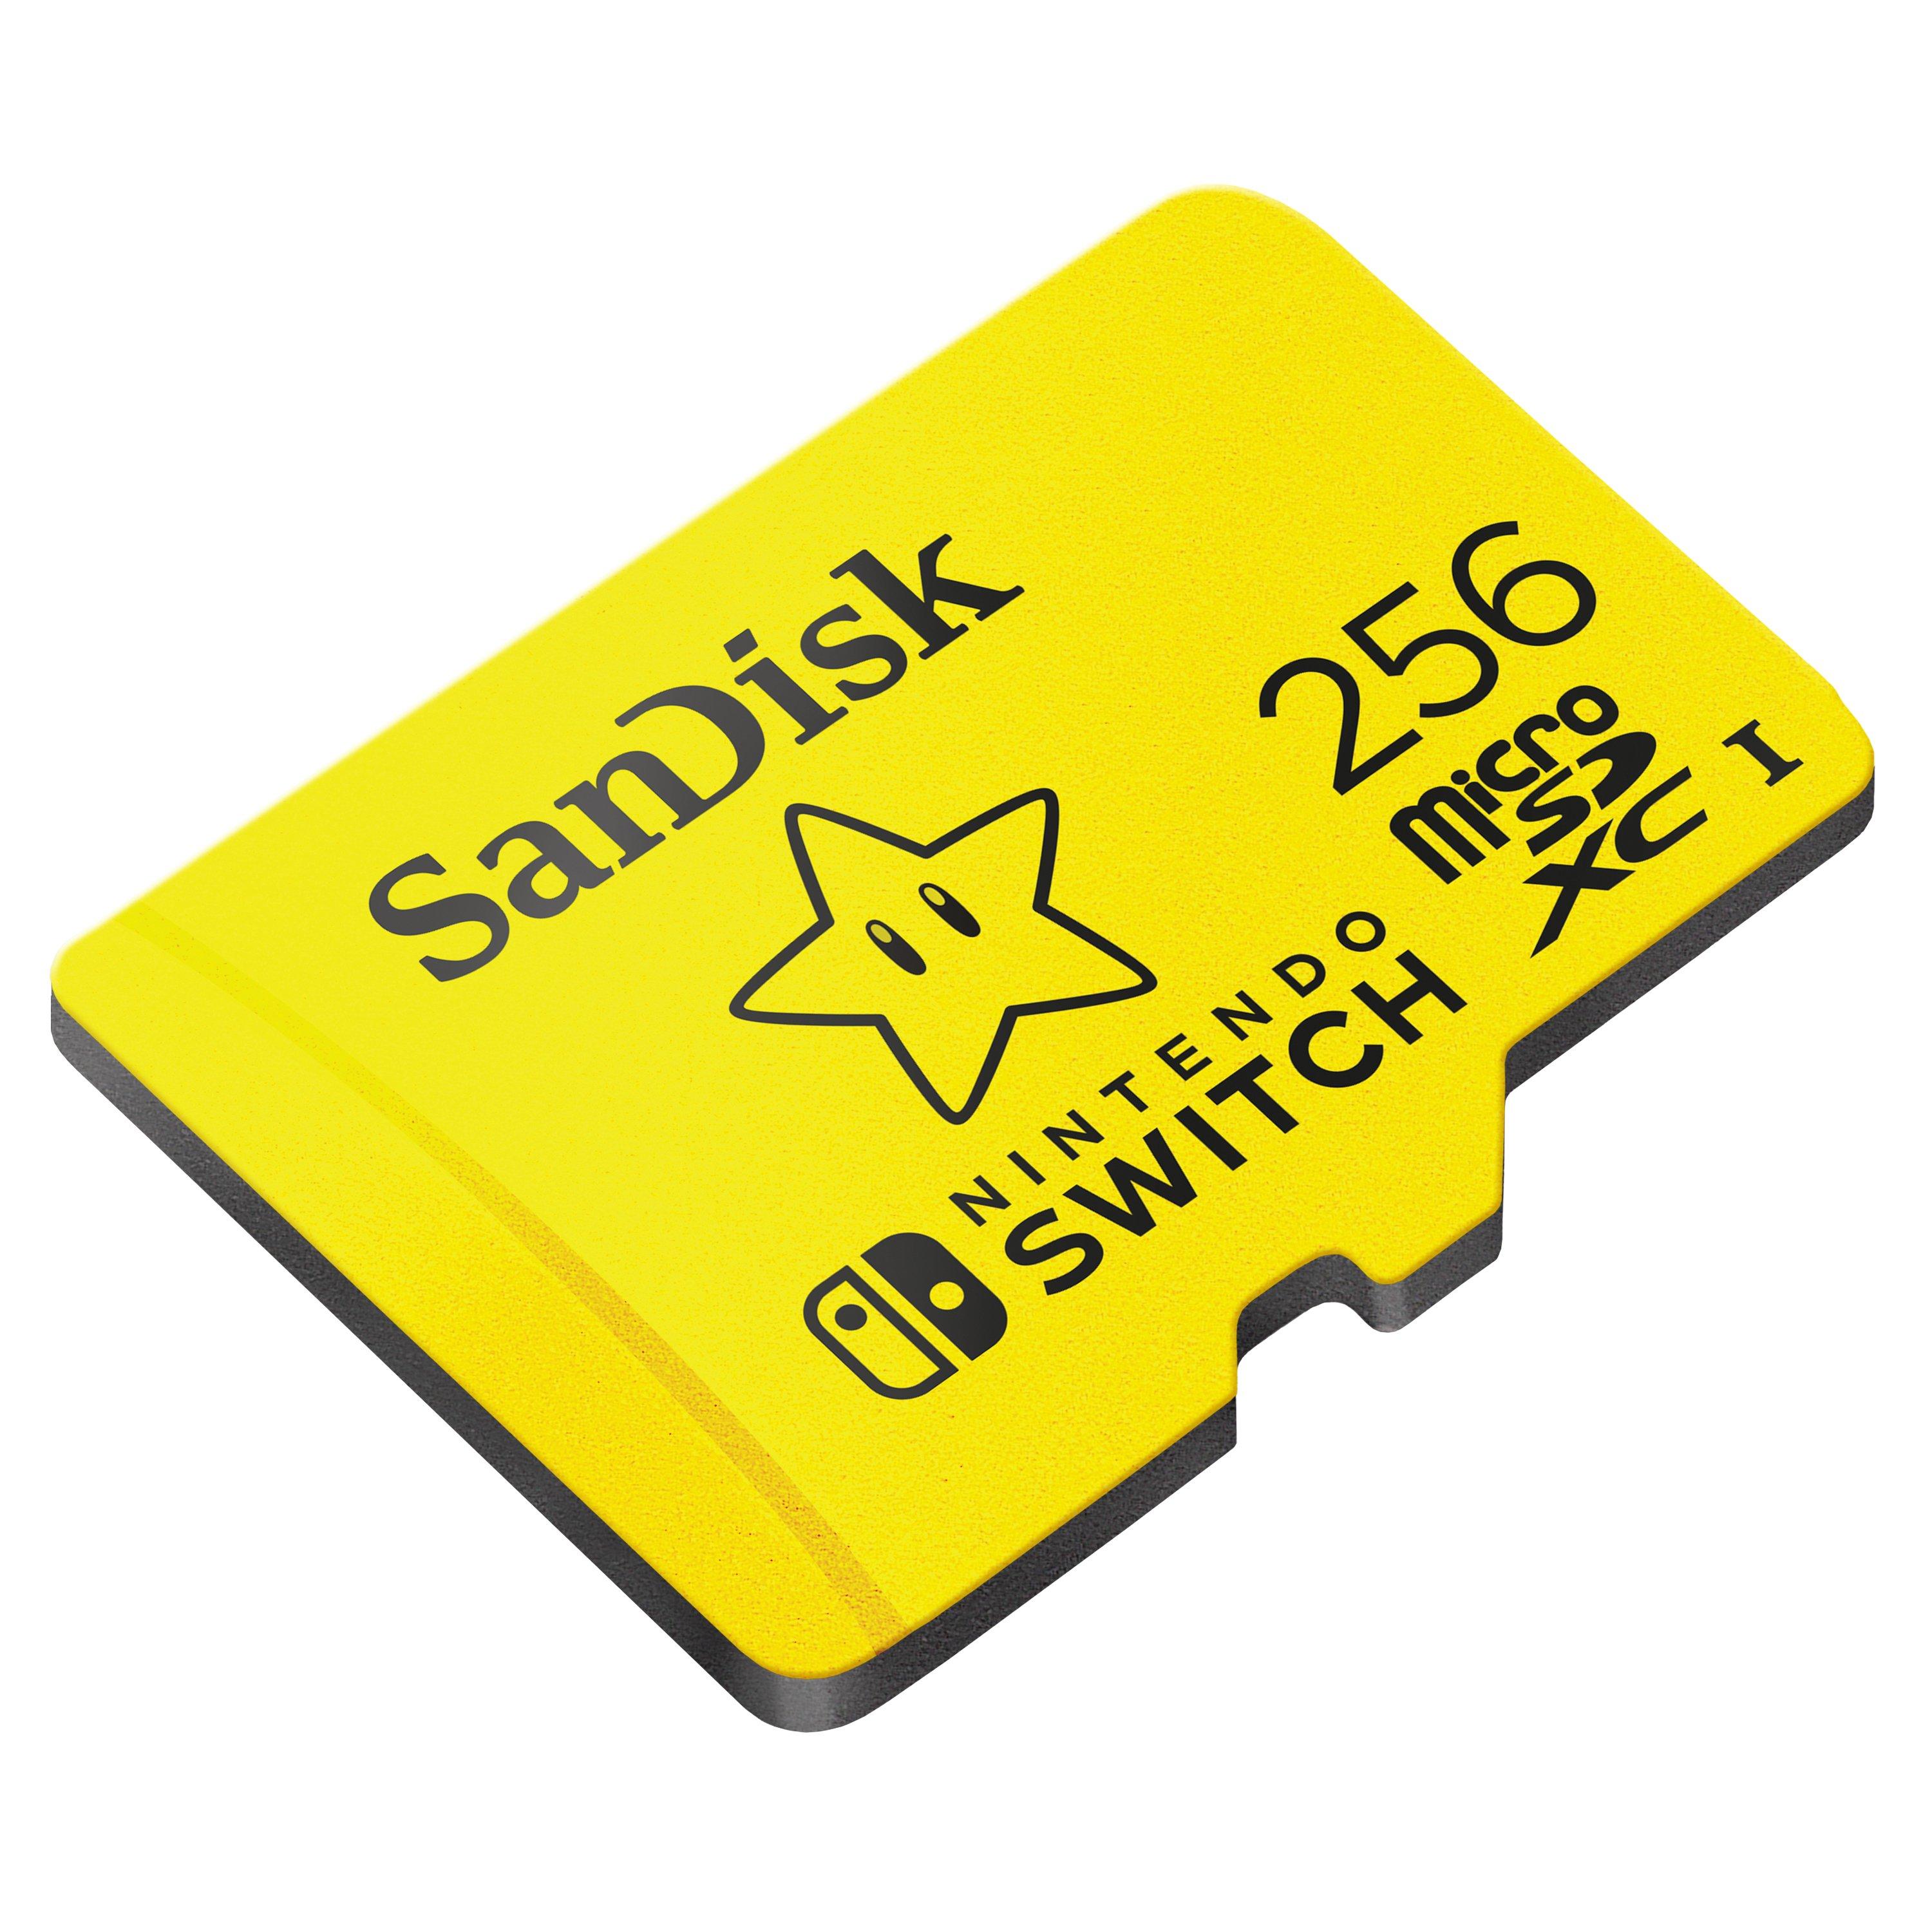 SanDisk microSDXC Card Licensed Memory Cards For Nintendo Swich Trans Flash  Cards micro SD Card For PC Loptop Game